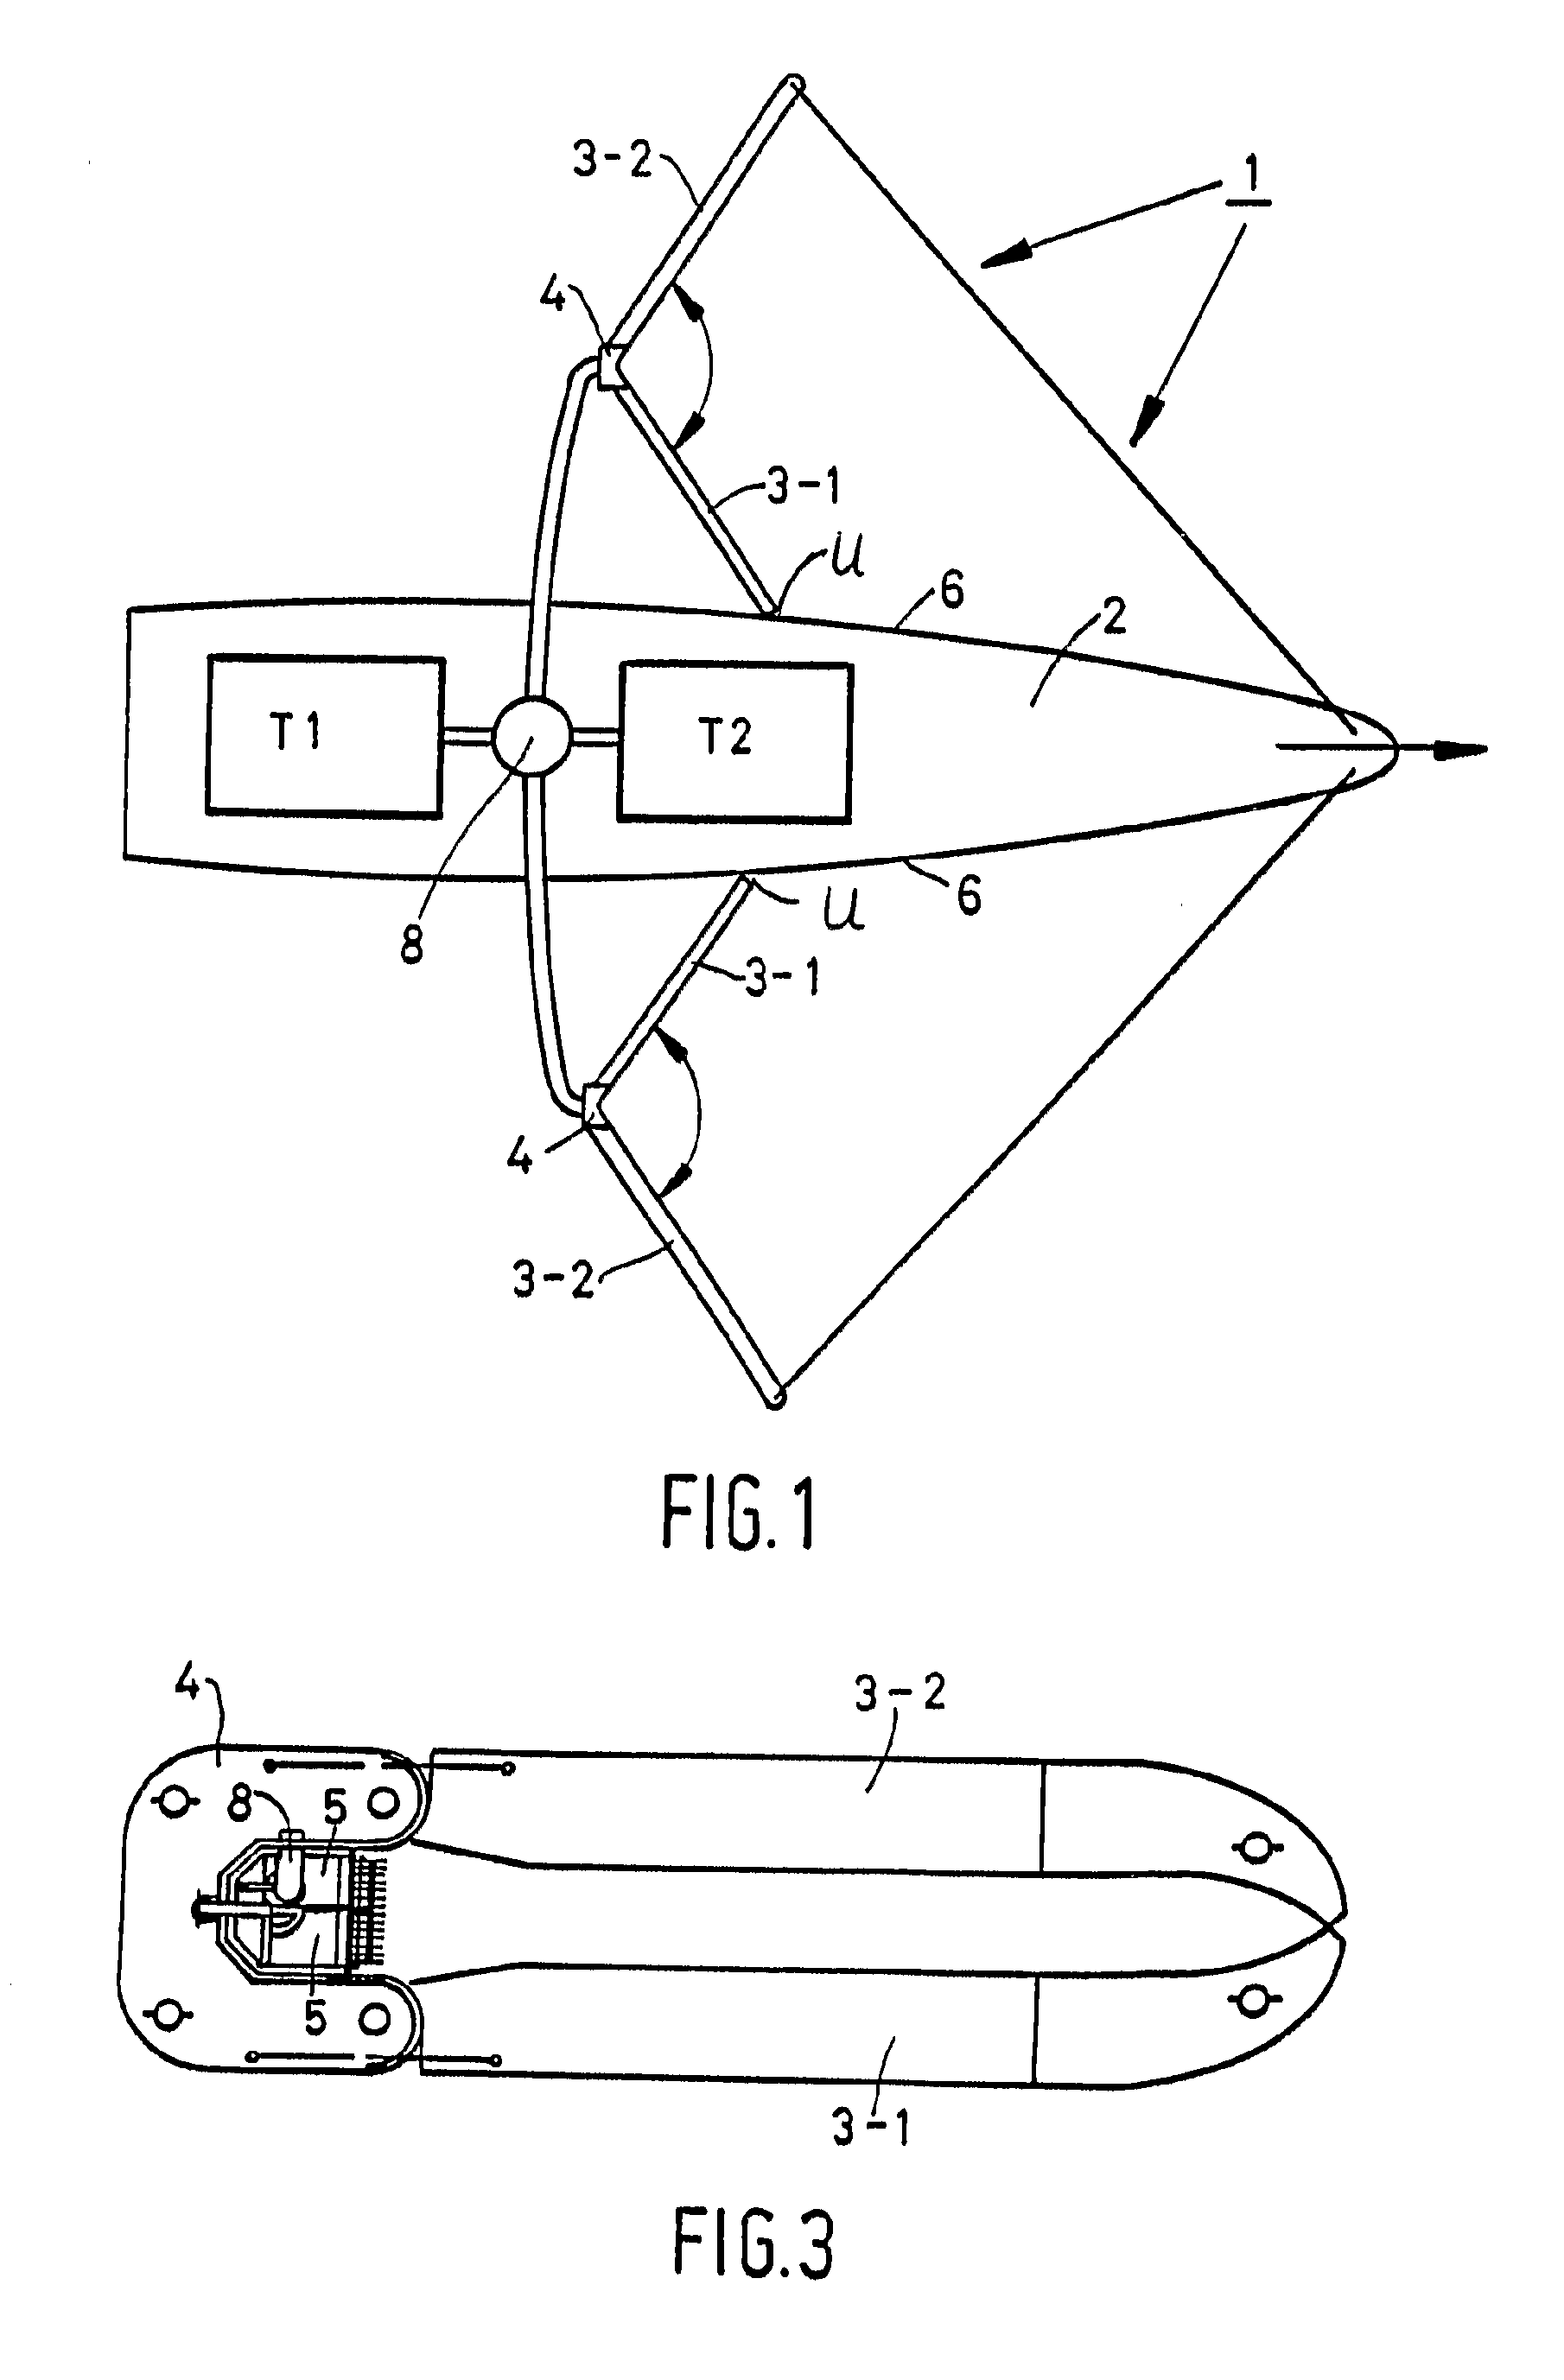 System for removing oil from a water surface